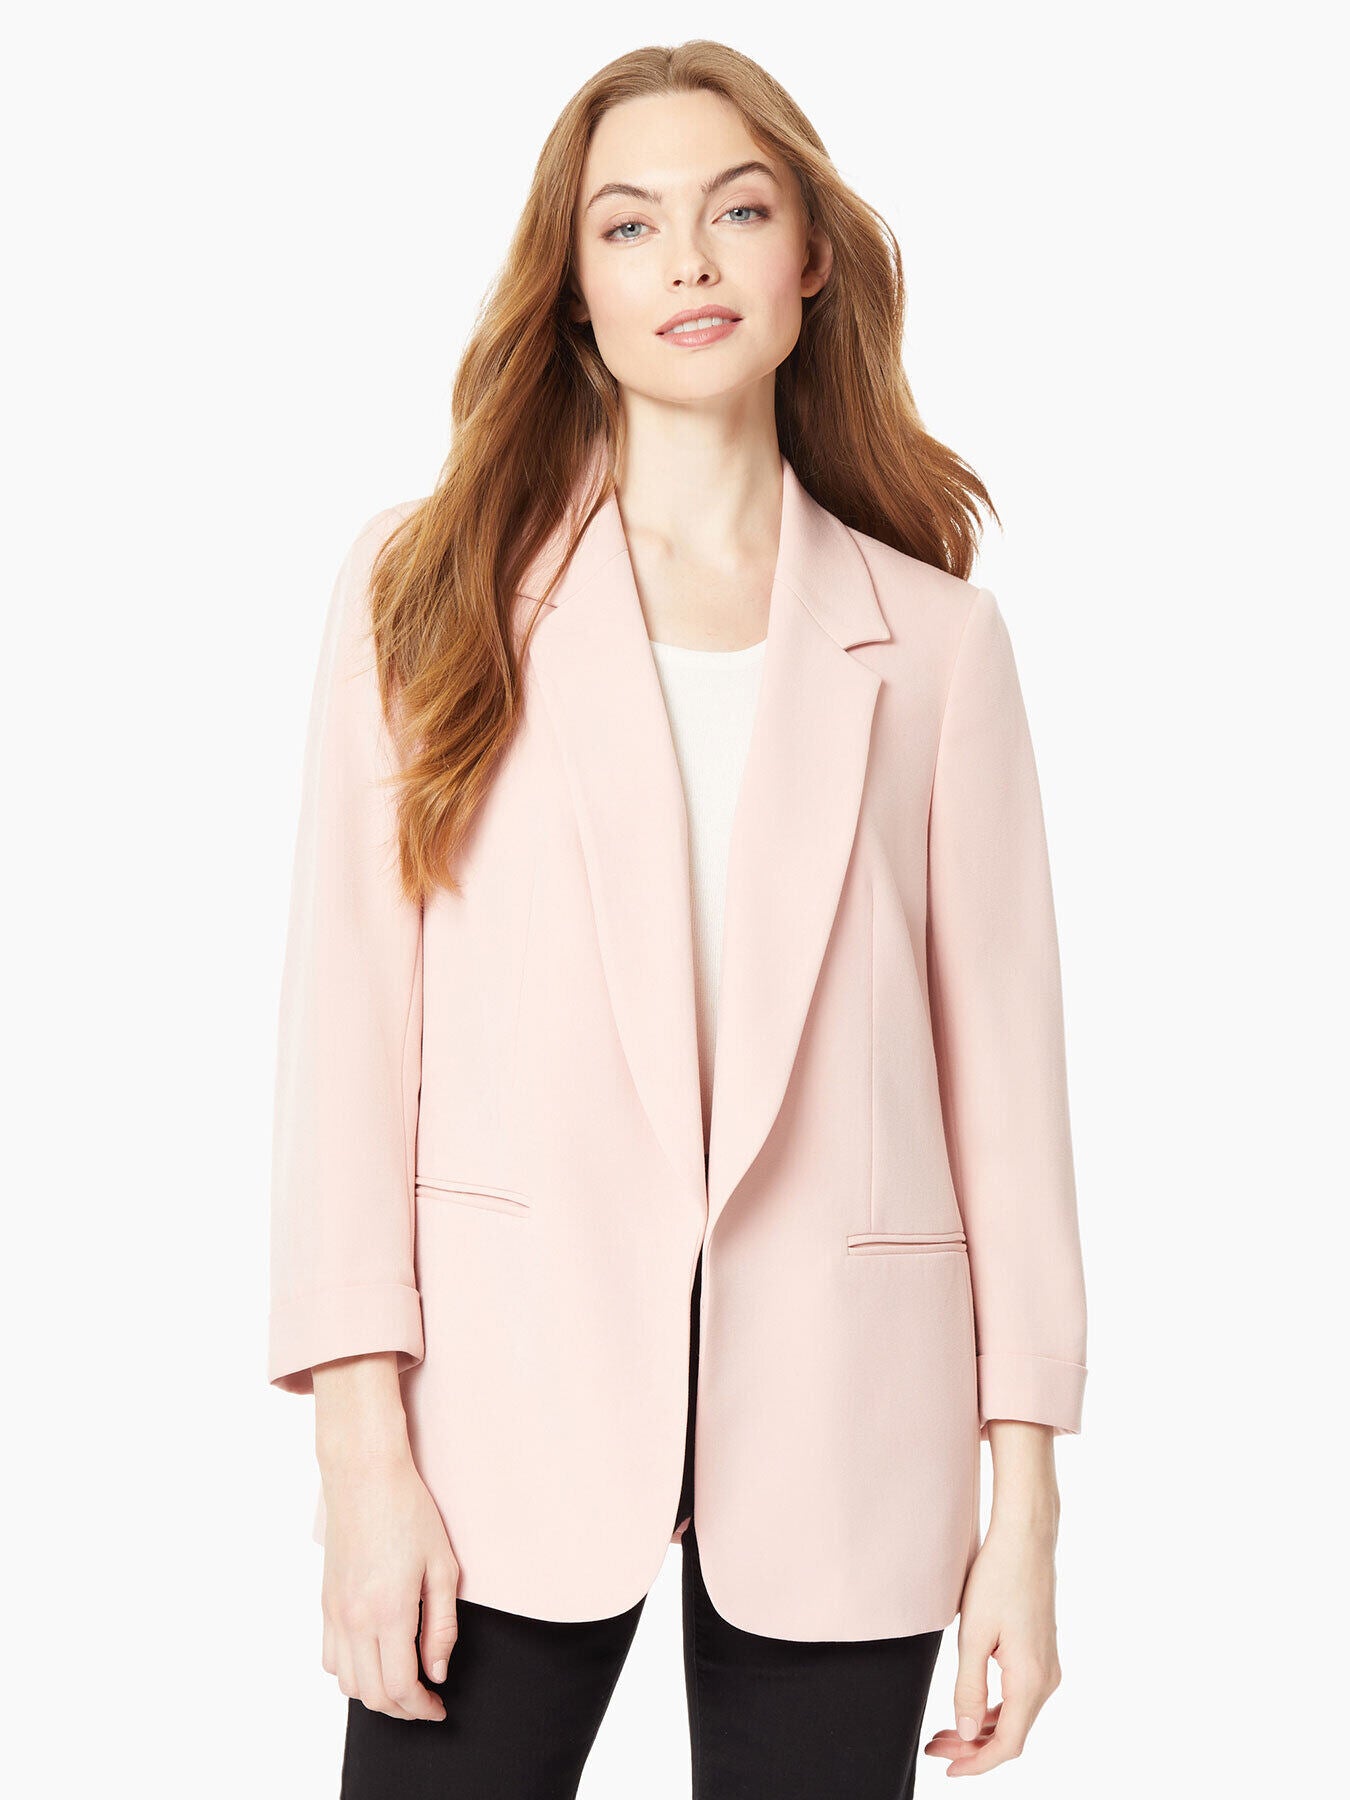 Women's Good American Suits & Separates